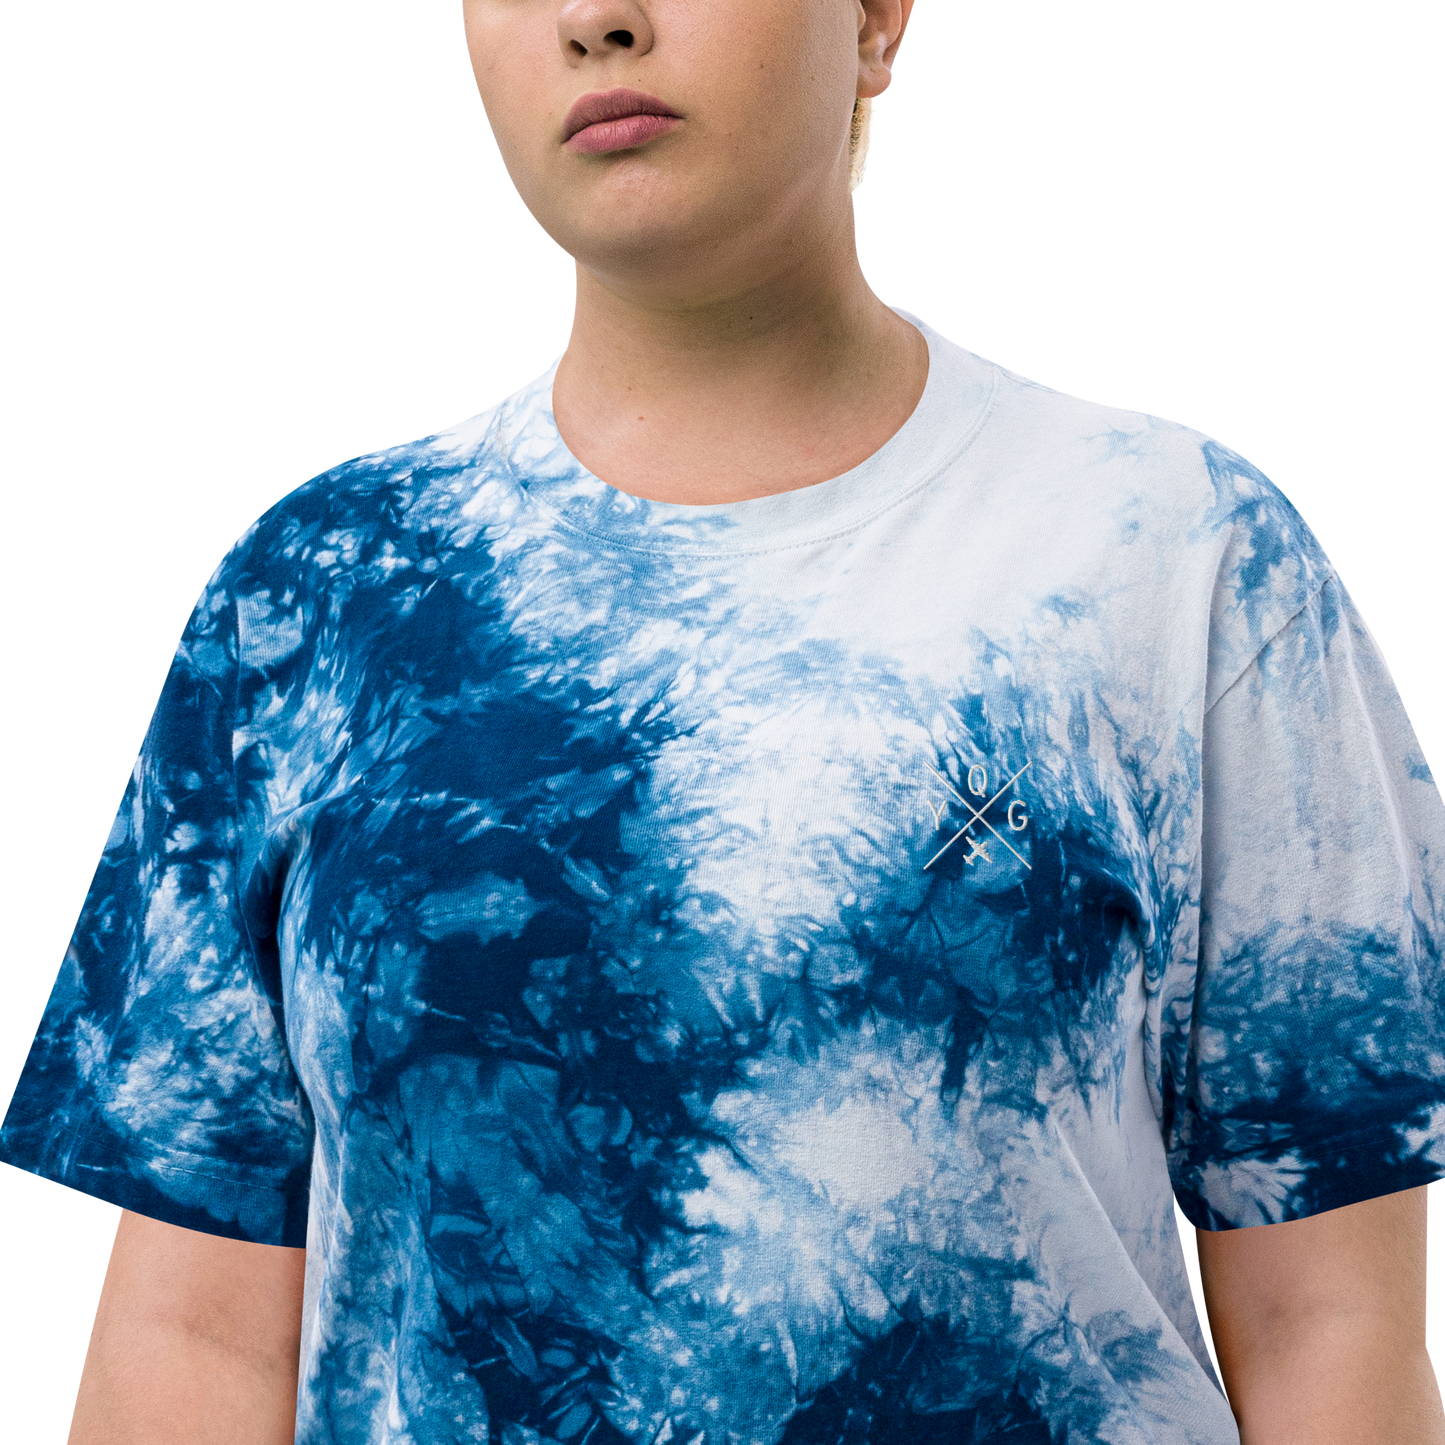 YHM Designs - YQG Windsor Oversized Tie-Dye T-Shirt - Crossed-X Design with Airport Code and Vintage Propliner - White Embroidery - Image 10